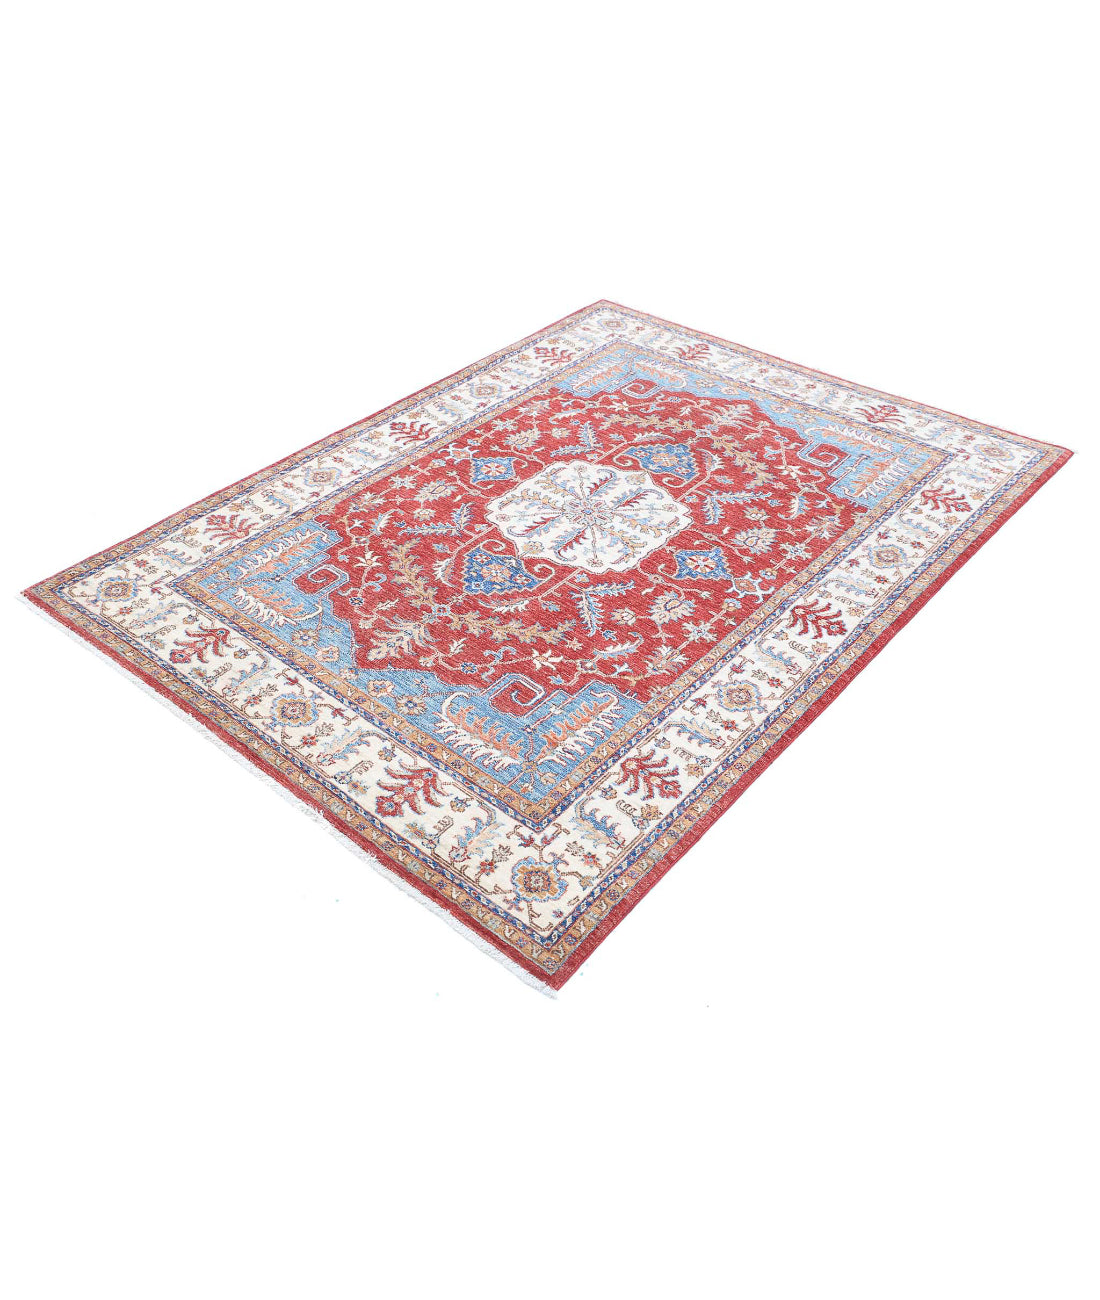 Heriz 4'9'' X 6'5'' Hand-Knotted Wool Rug 4'9'' x 6'5'' (143 X 193) / Red / Ivory